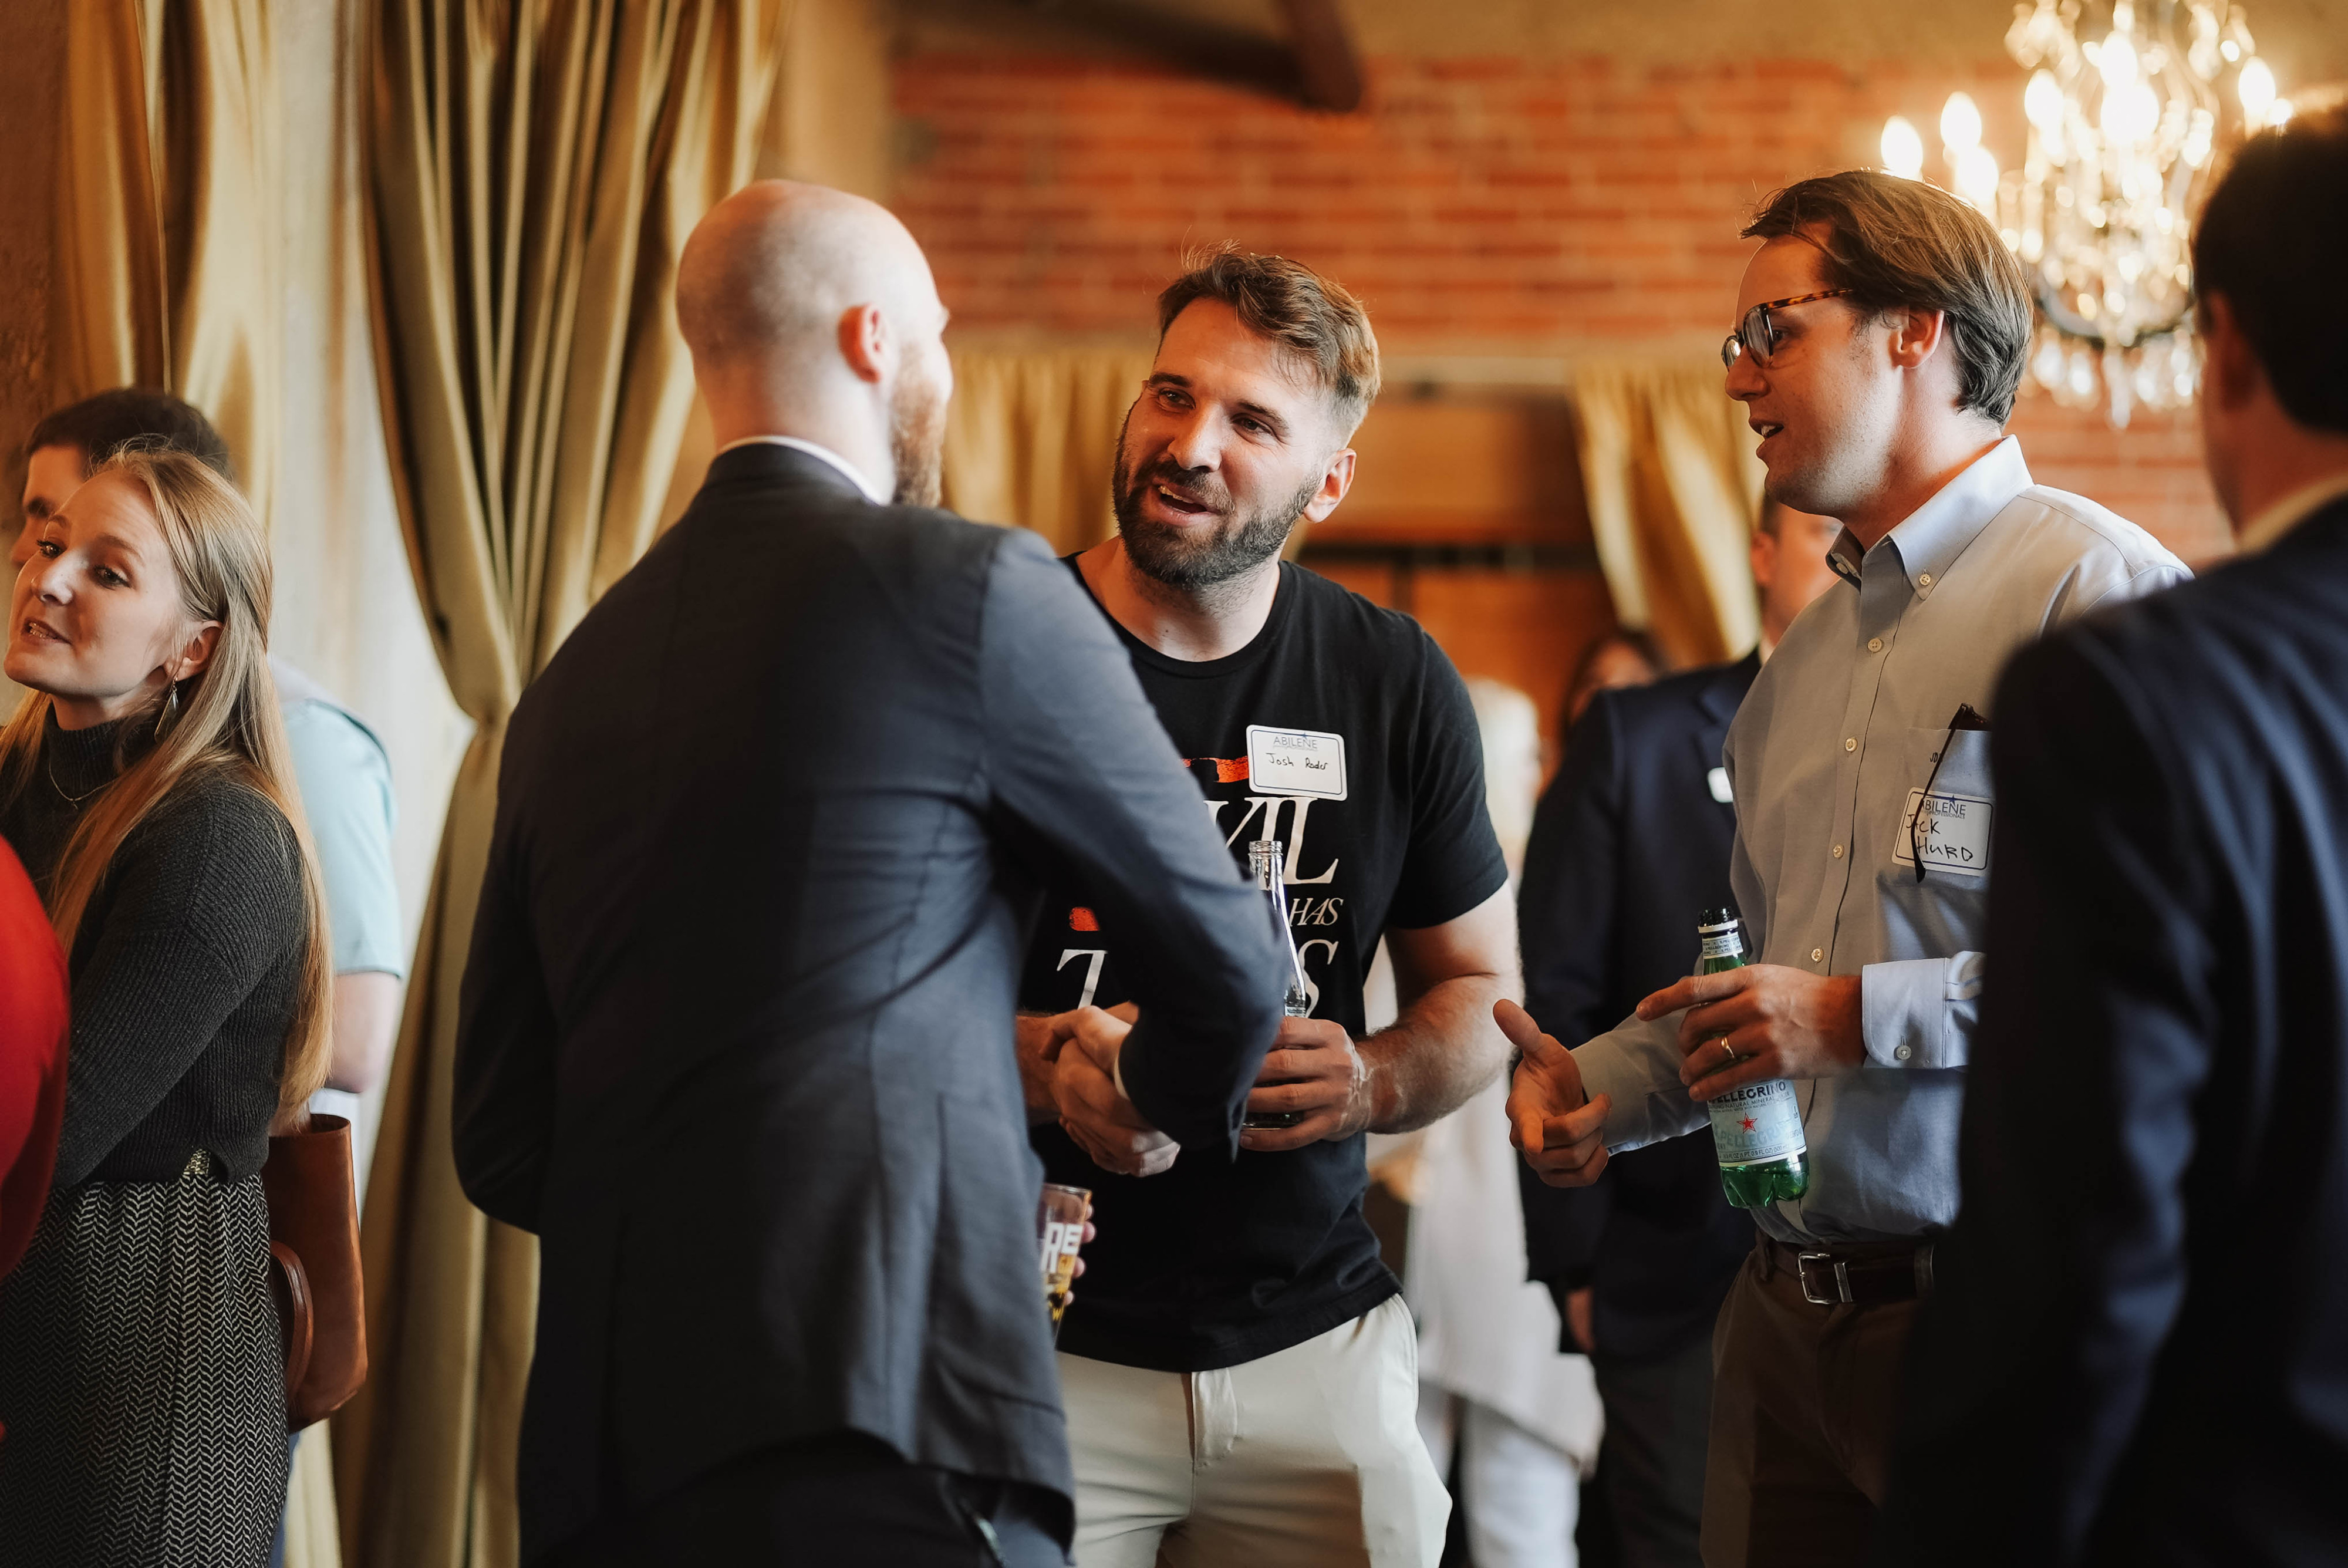 men shaking hands at networking event